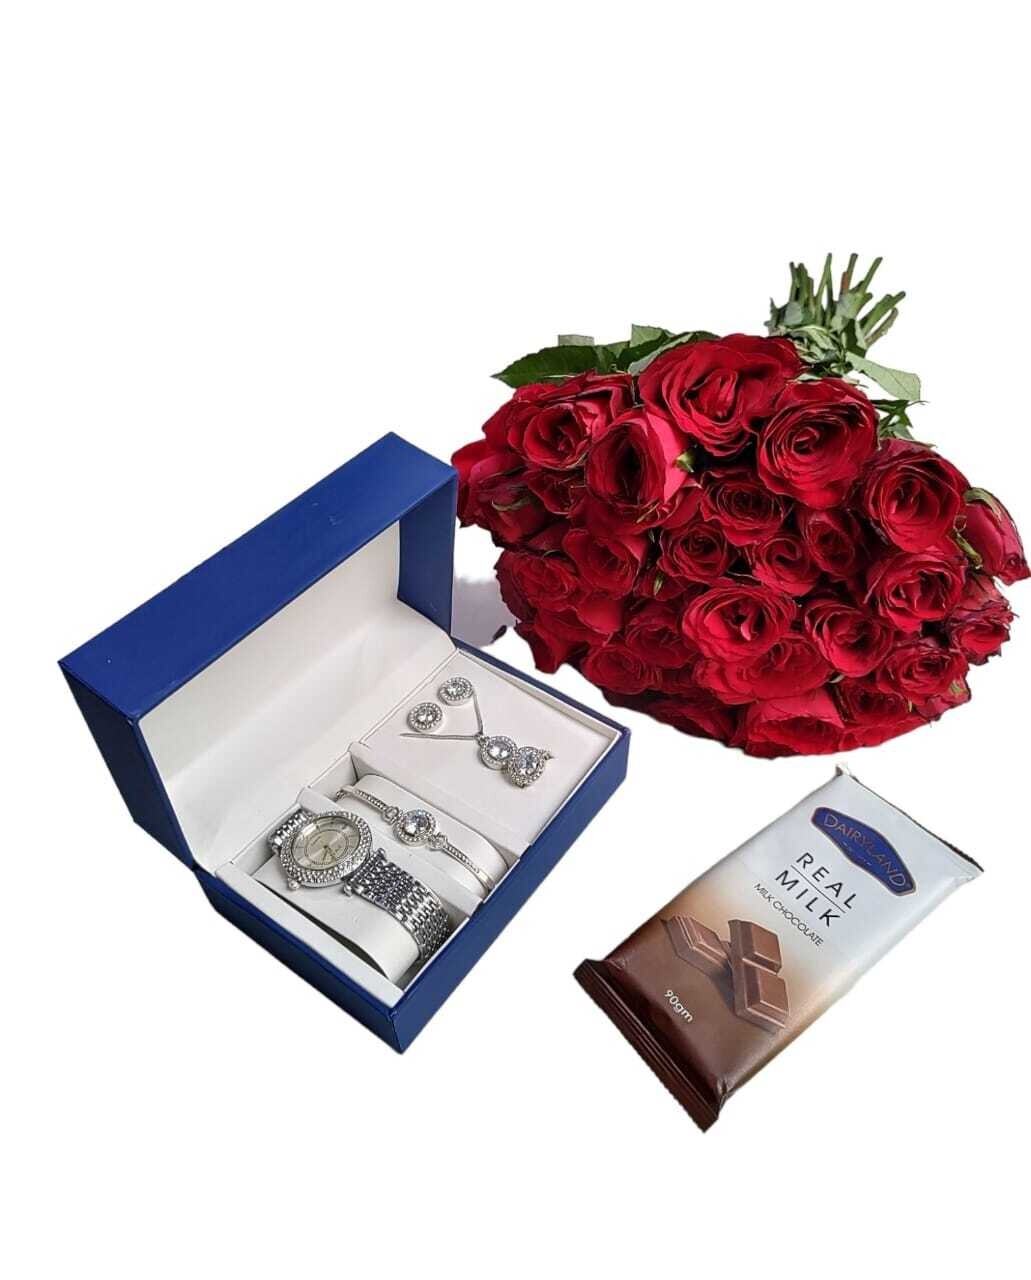 Gift package with flowers, ladies giftset & chocolate